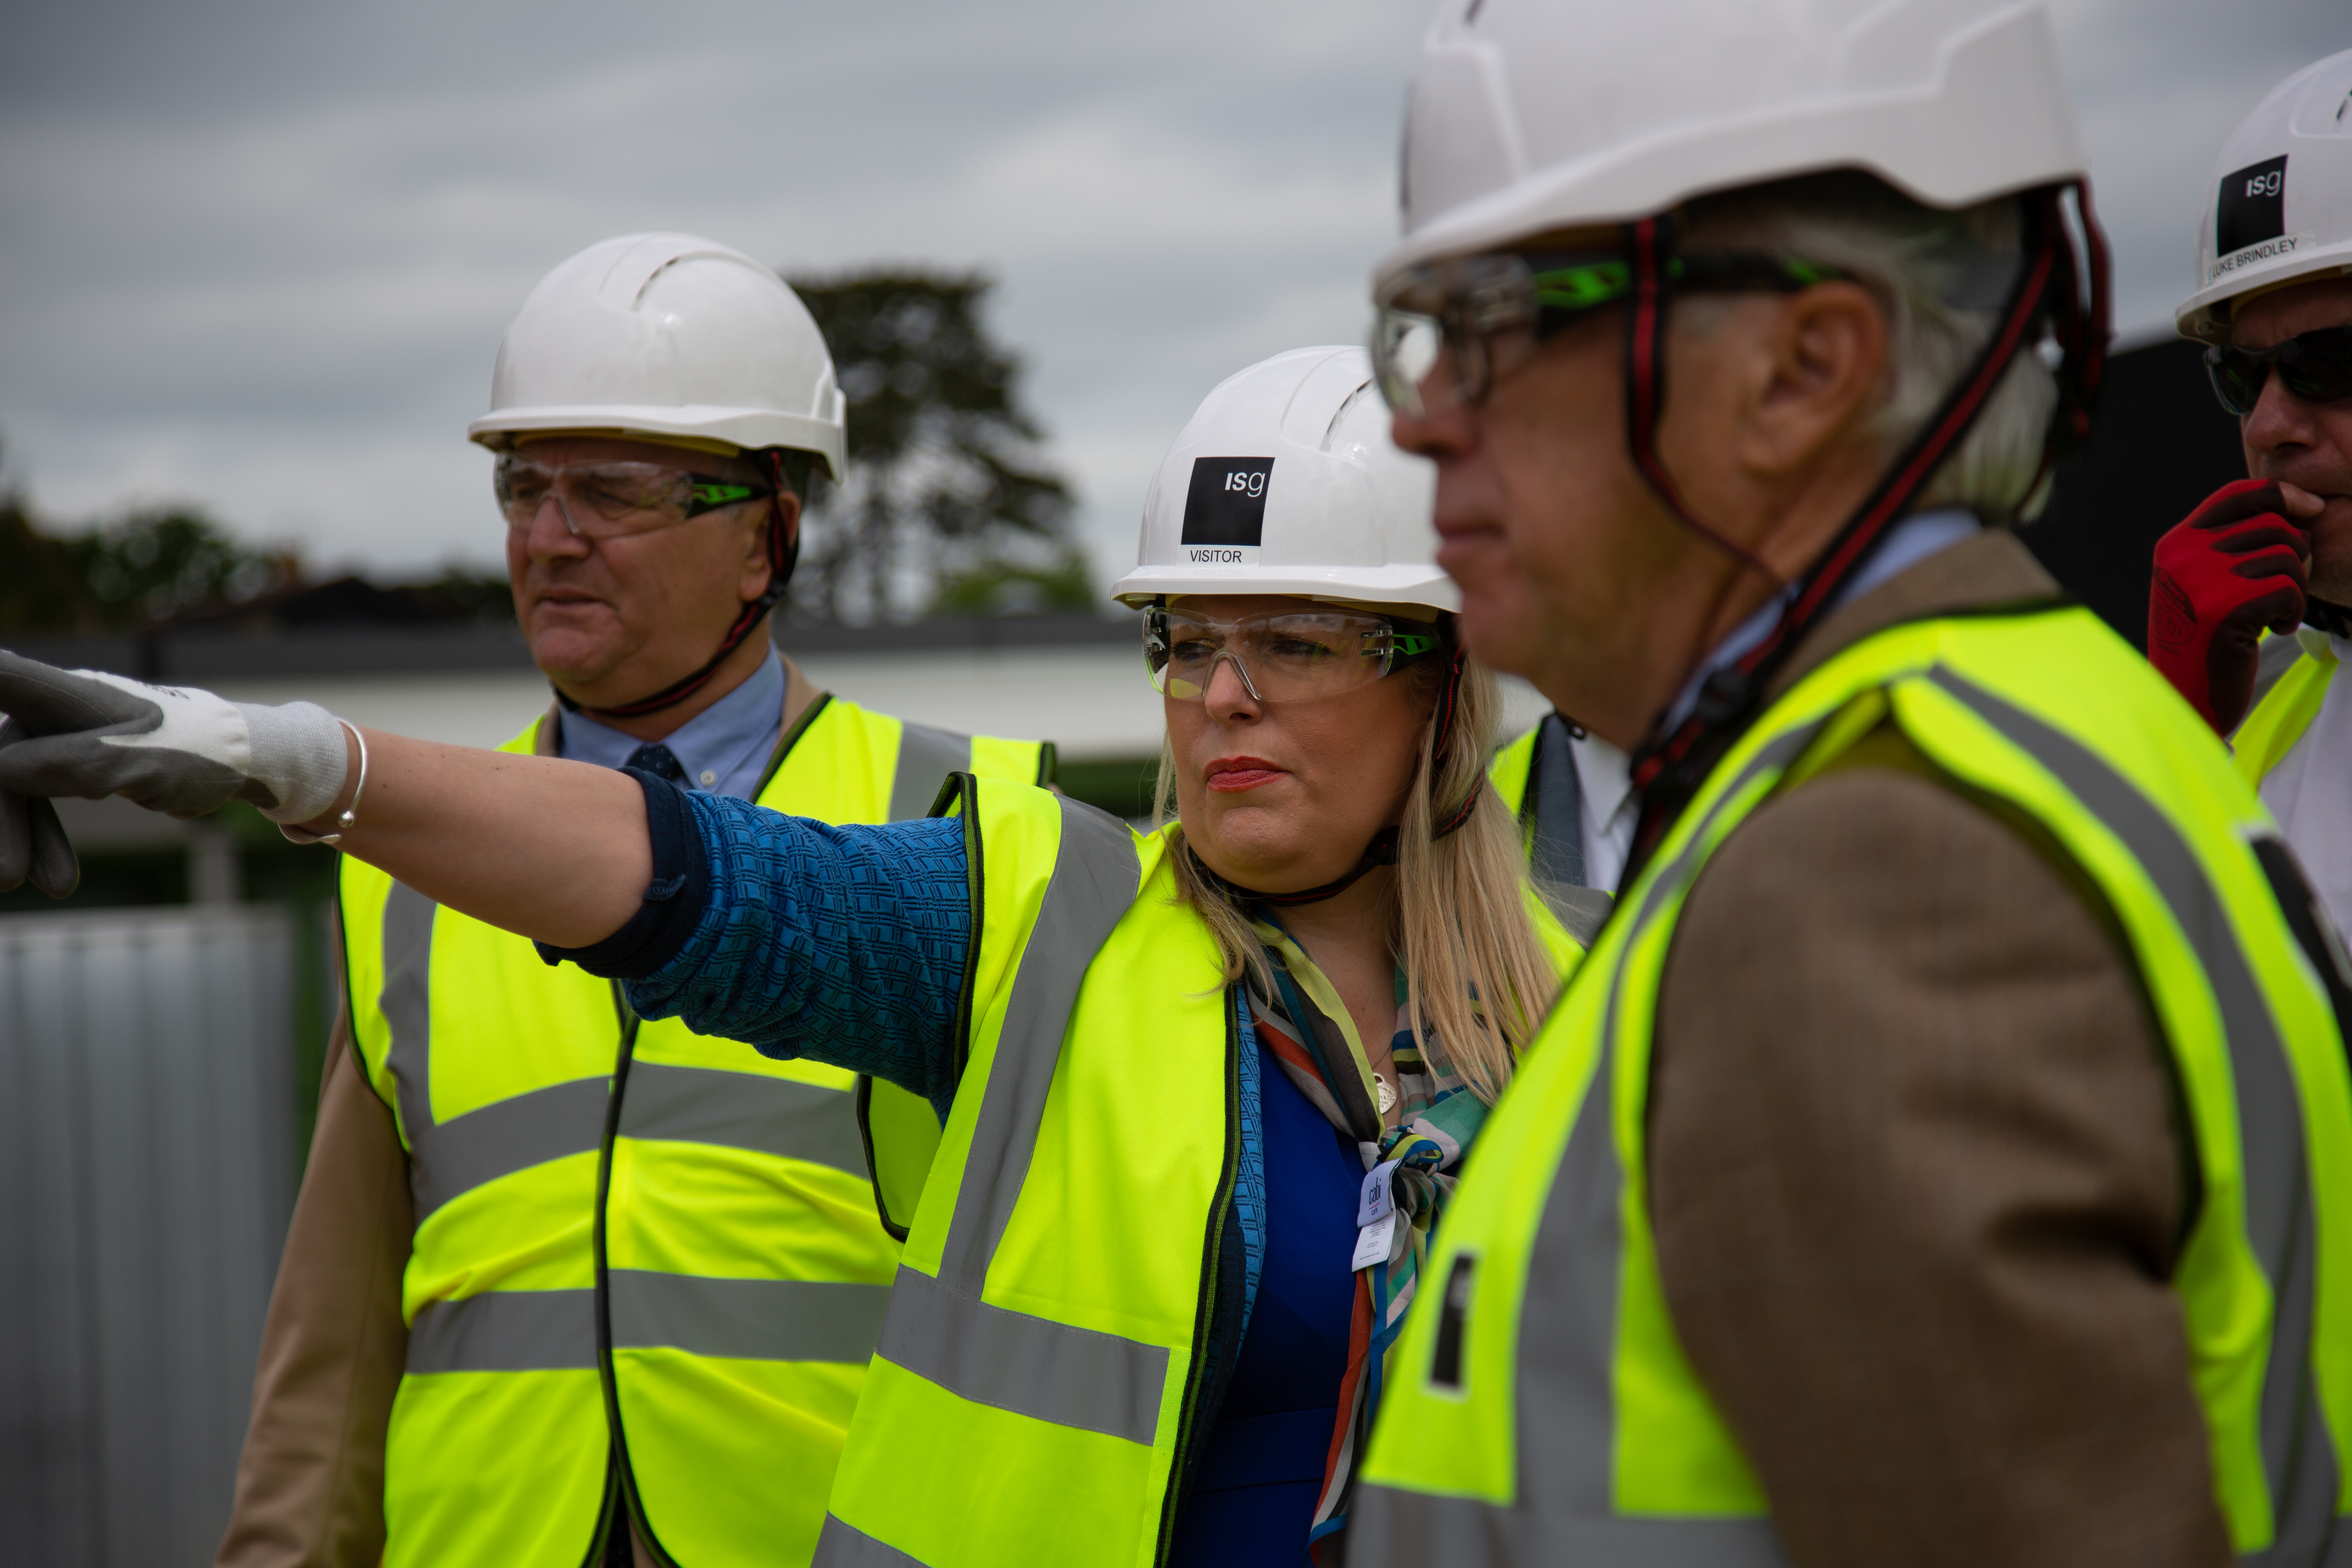 Mims Davies MP joined a tour of the site